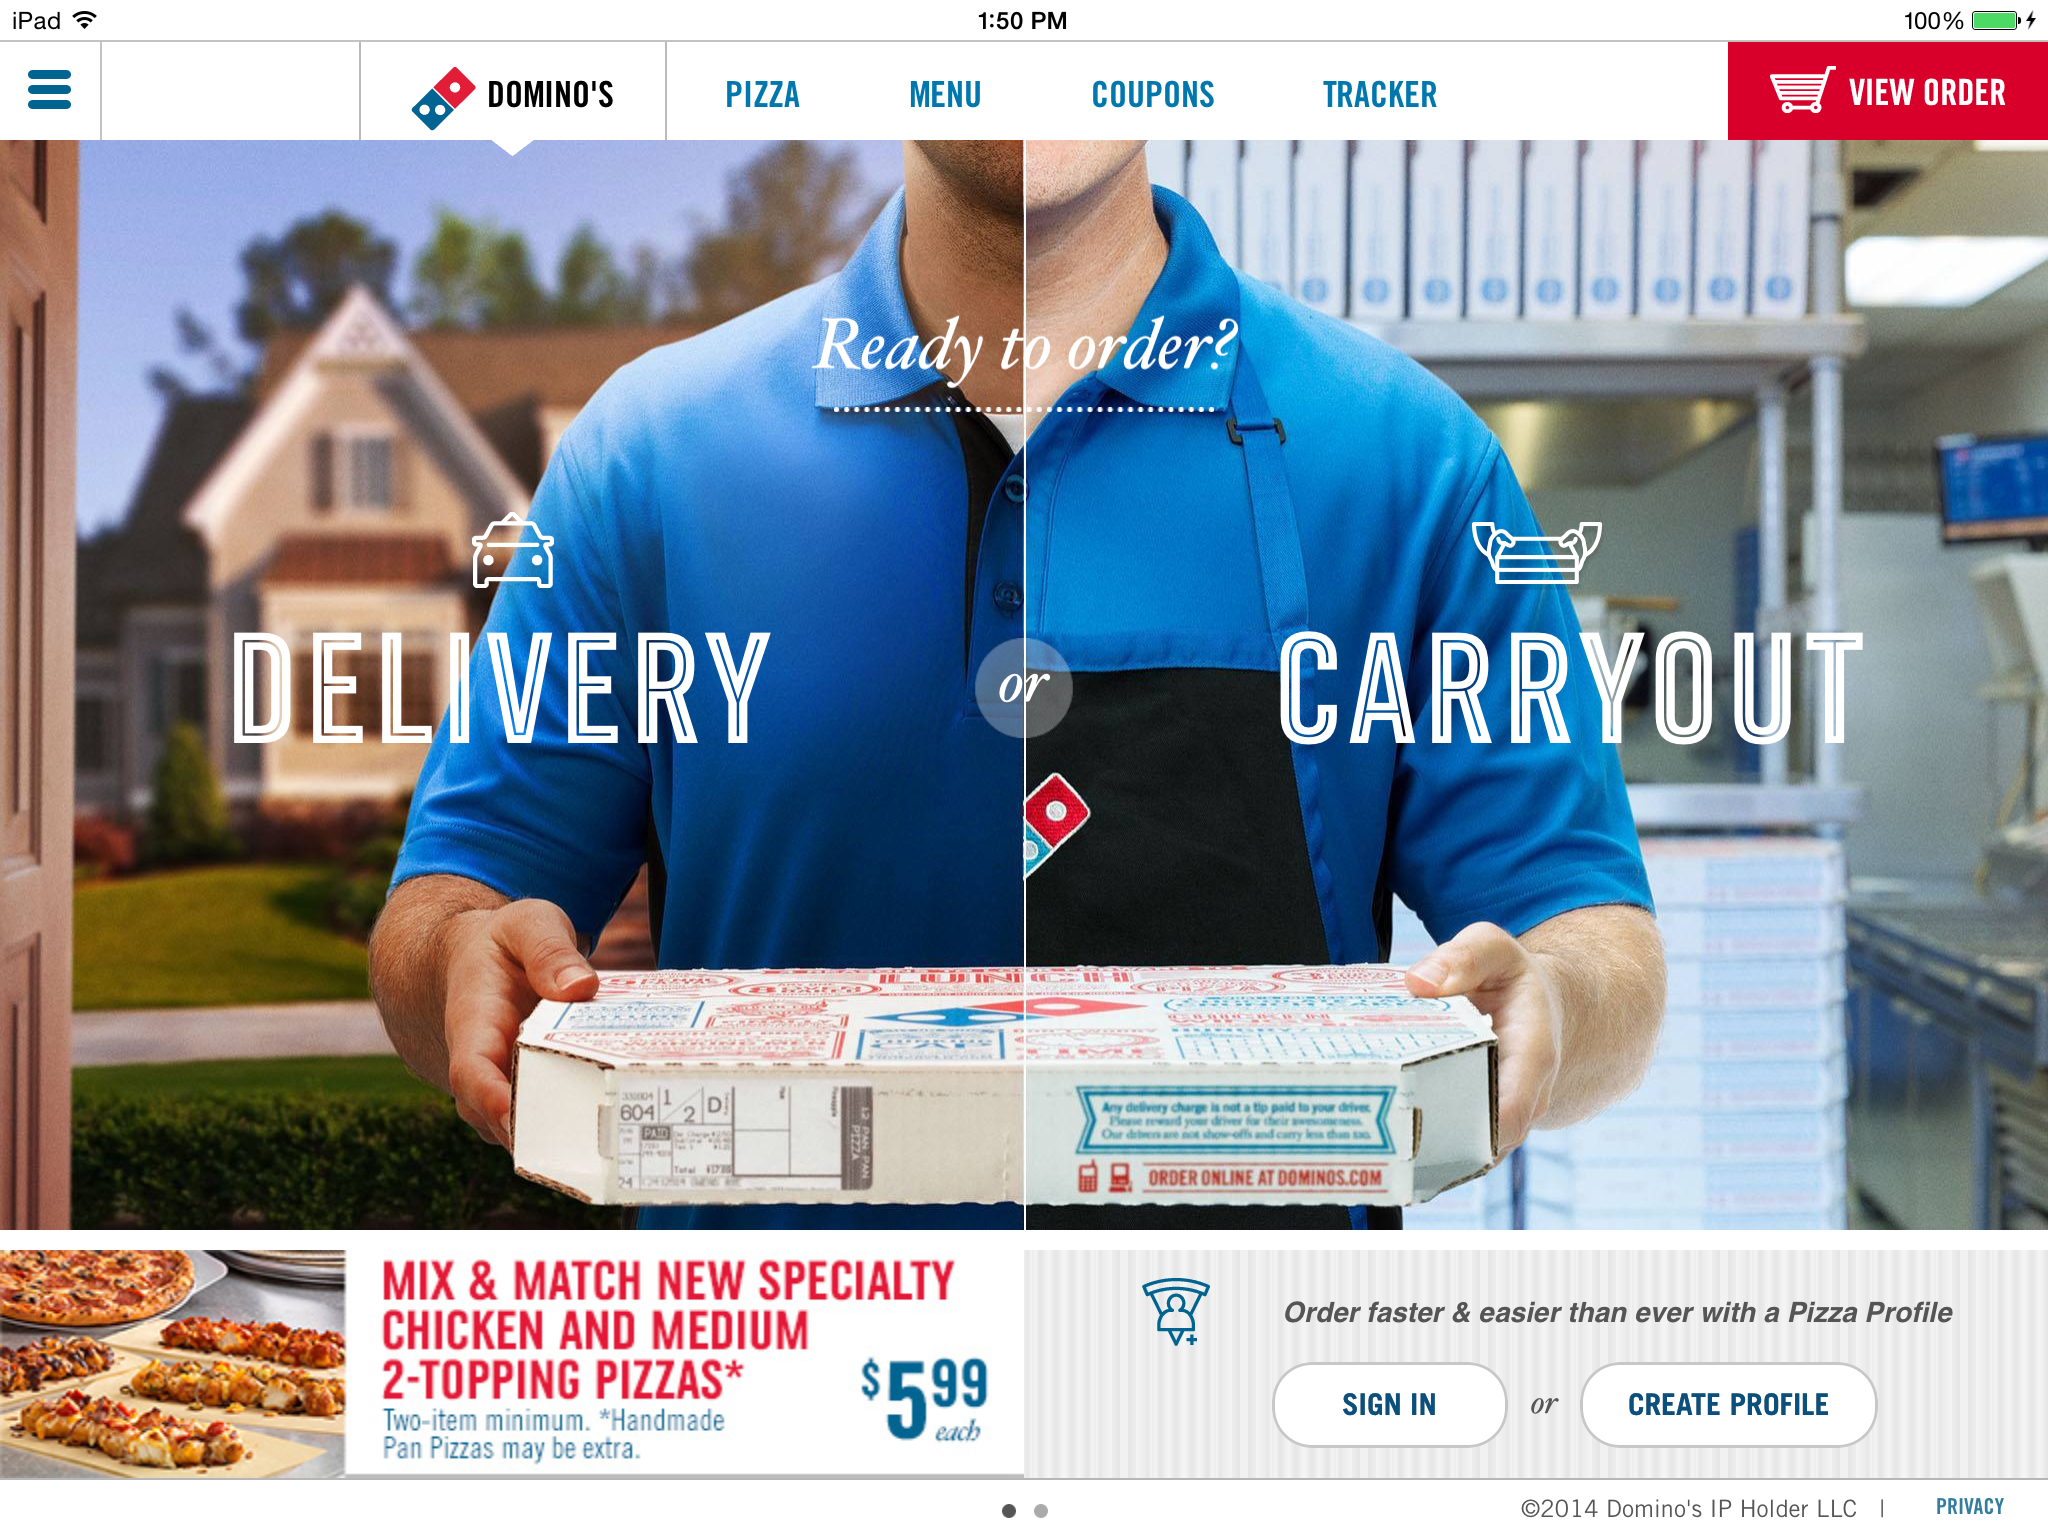 Extra order. Domino's pizza USA. Ready to order.